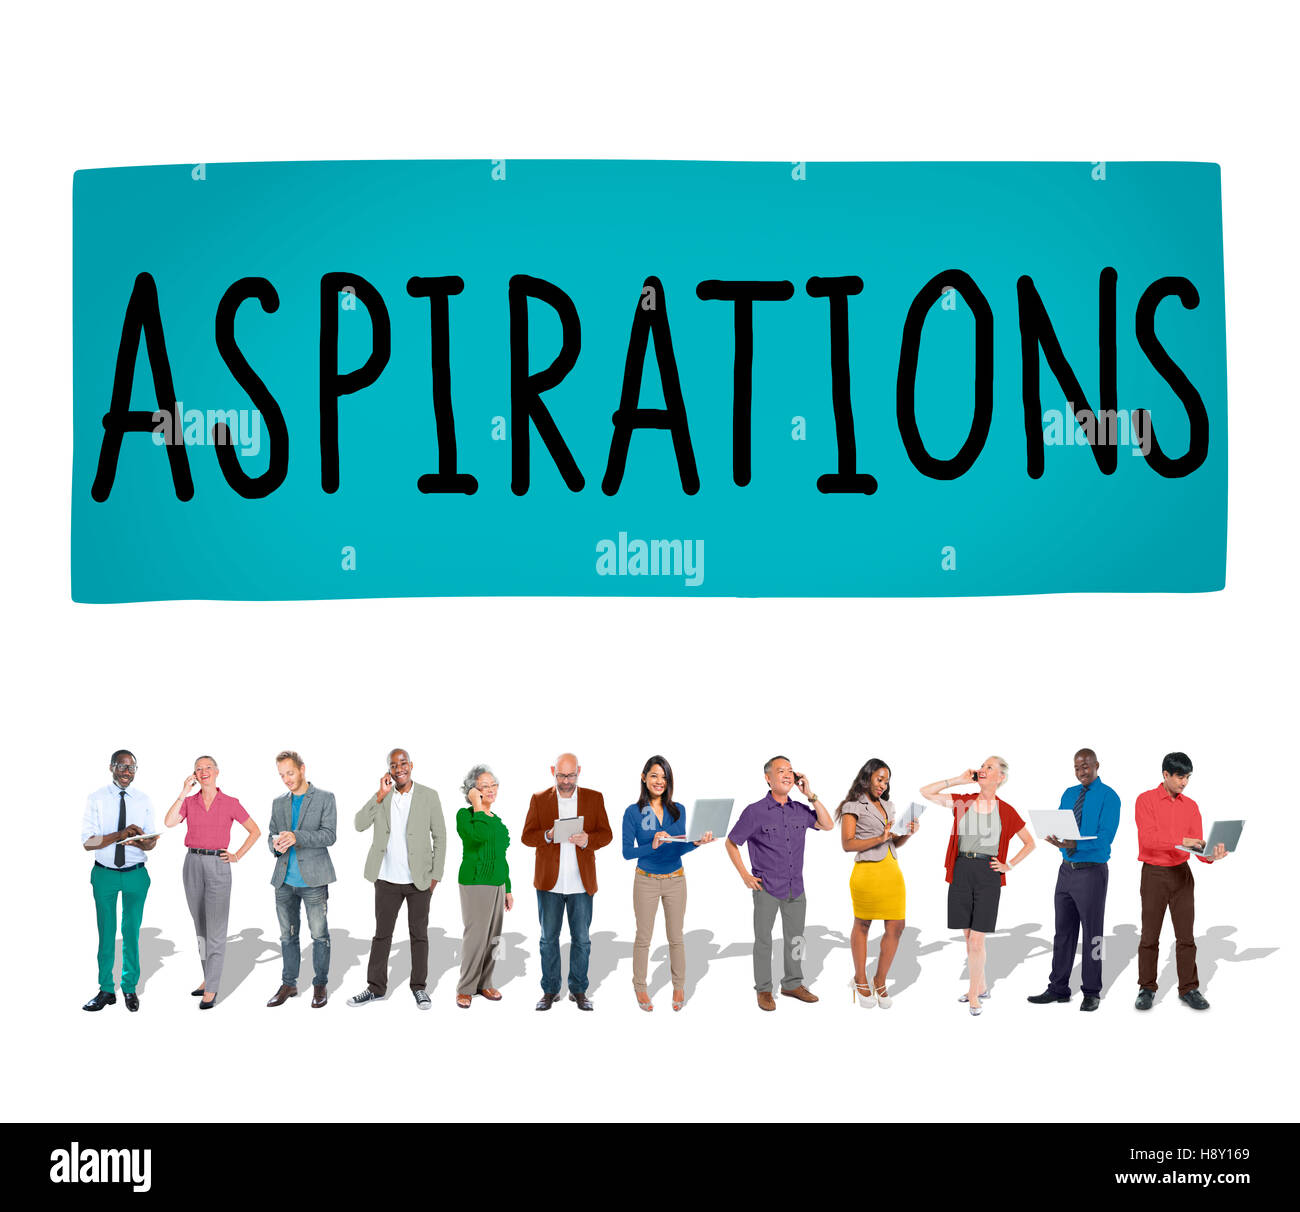 Aspirations Innovation Goal Target Strategy Concept Stock Photo